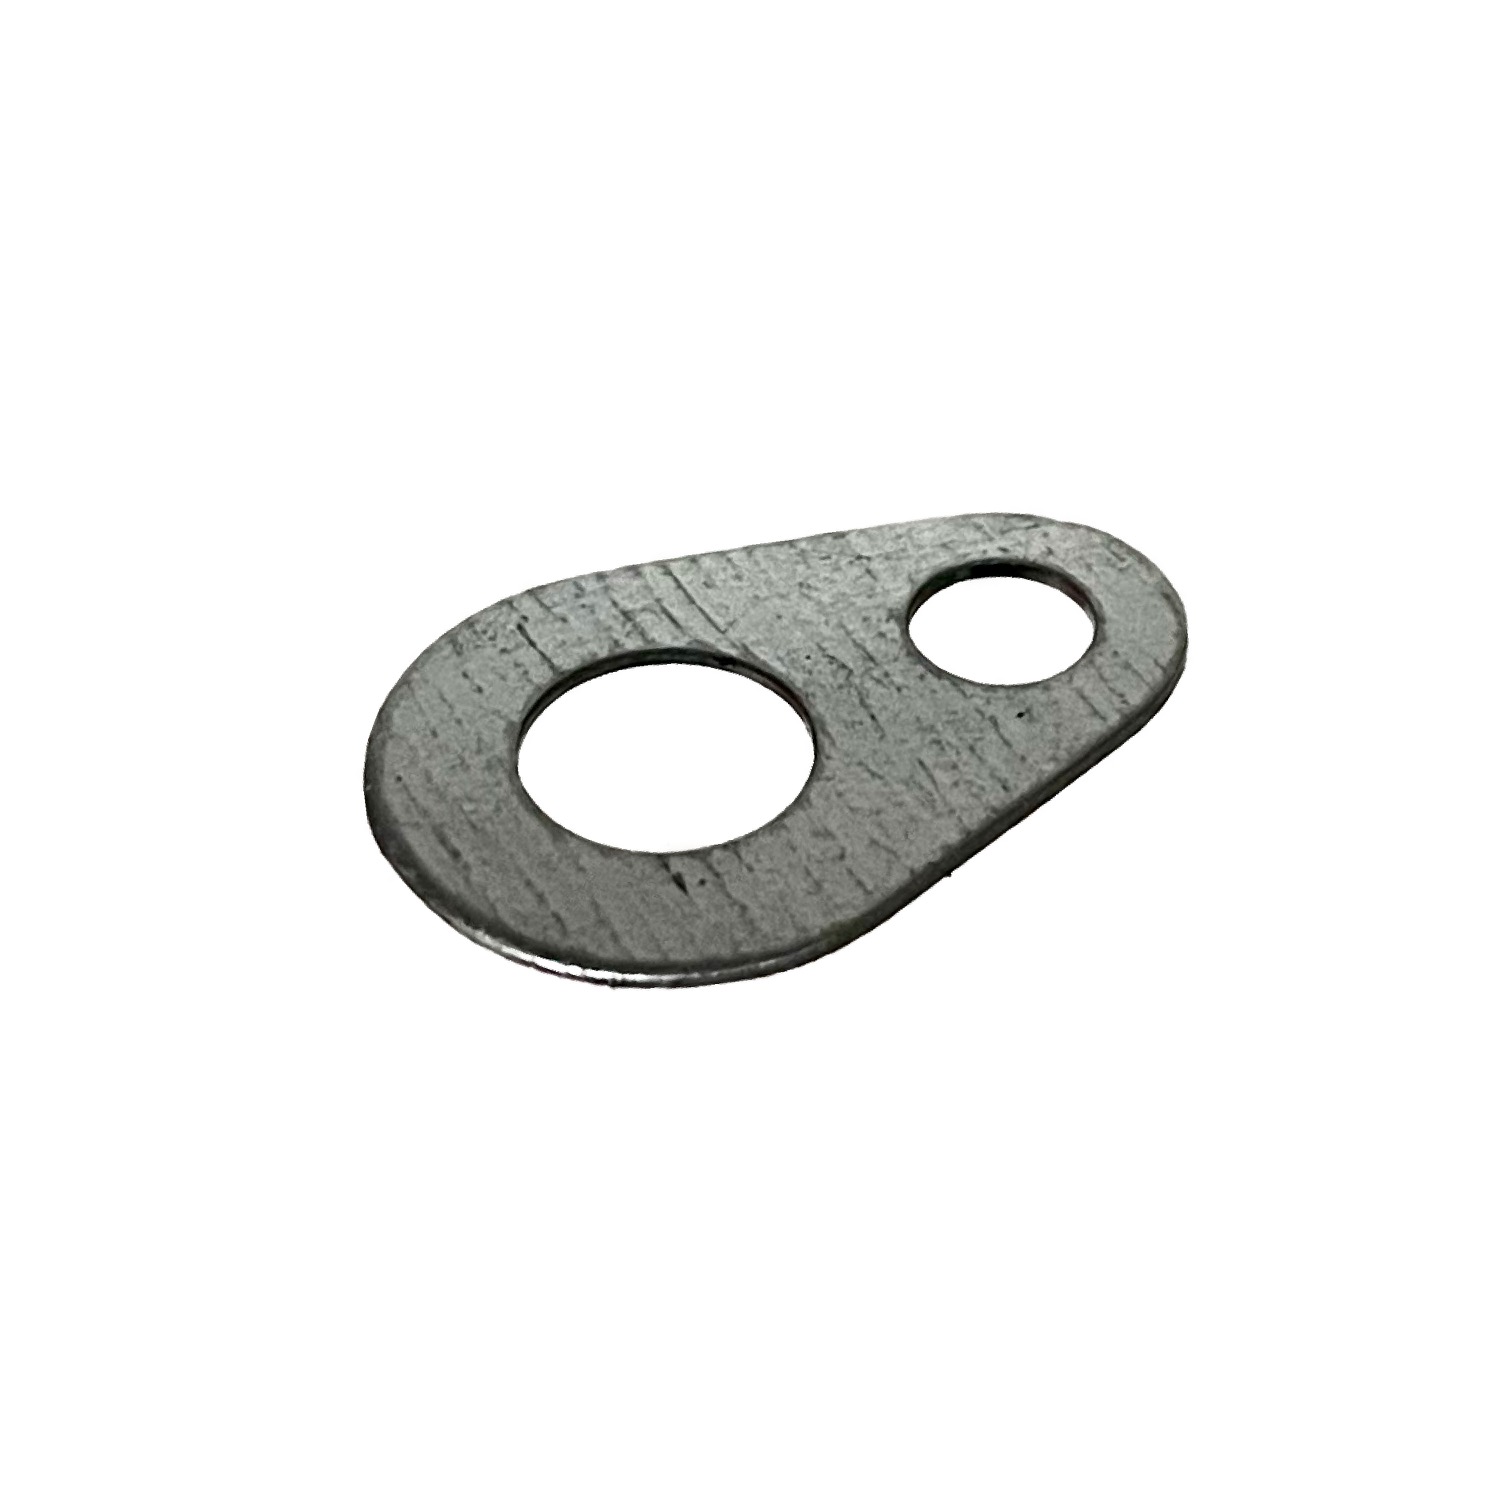 Safety-clip of clutch - JAWA 50 05,20-23